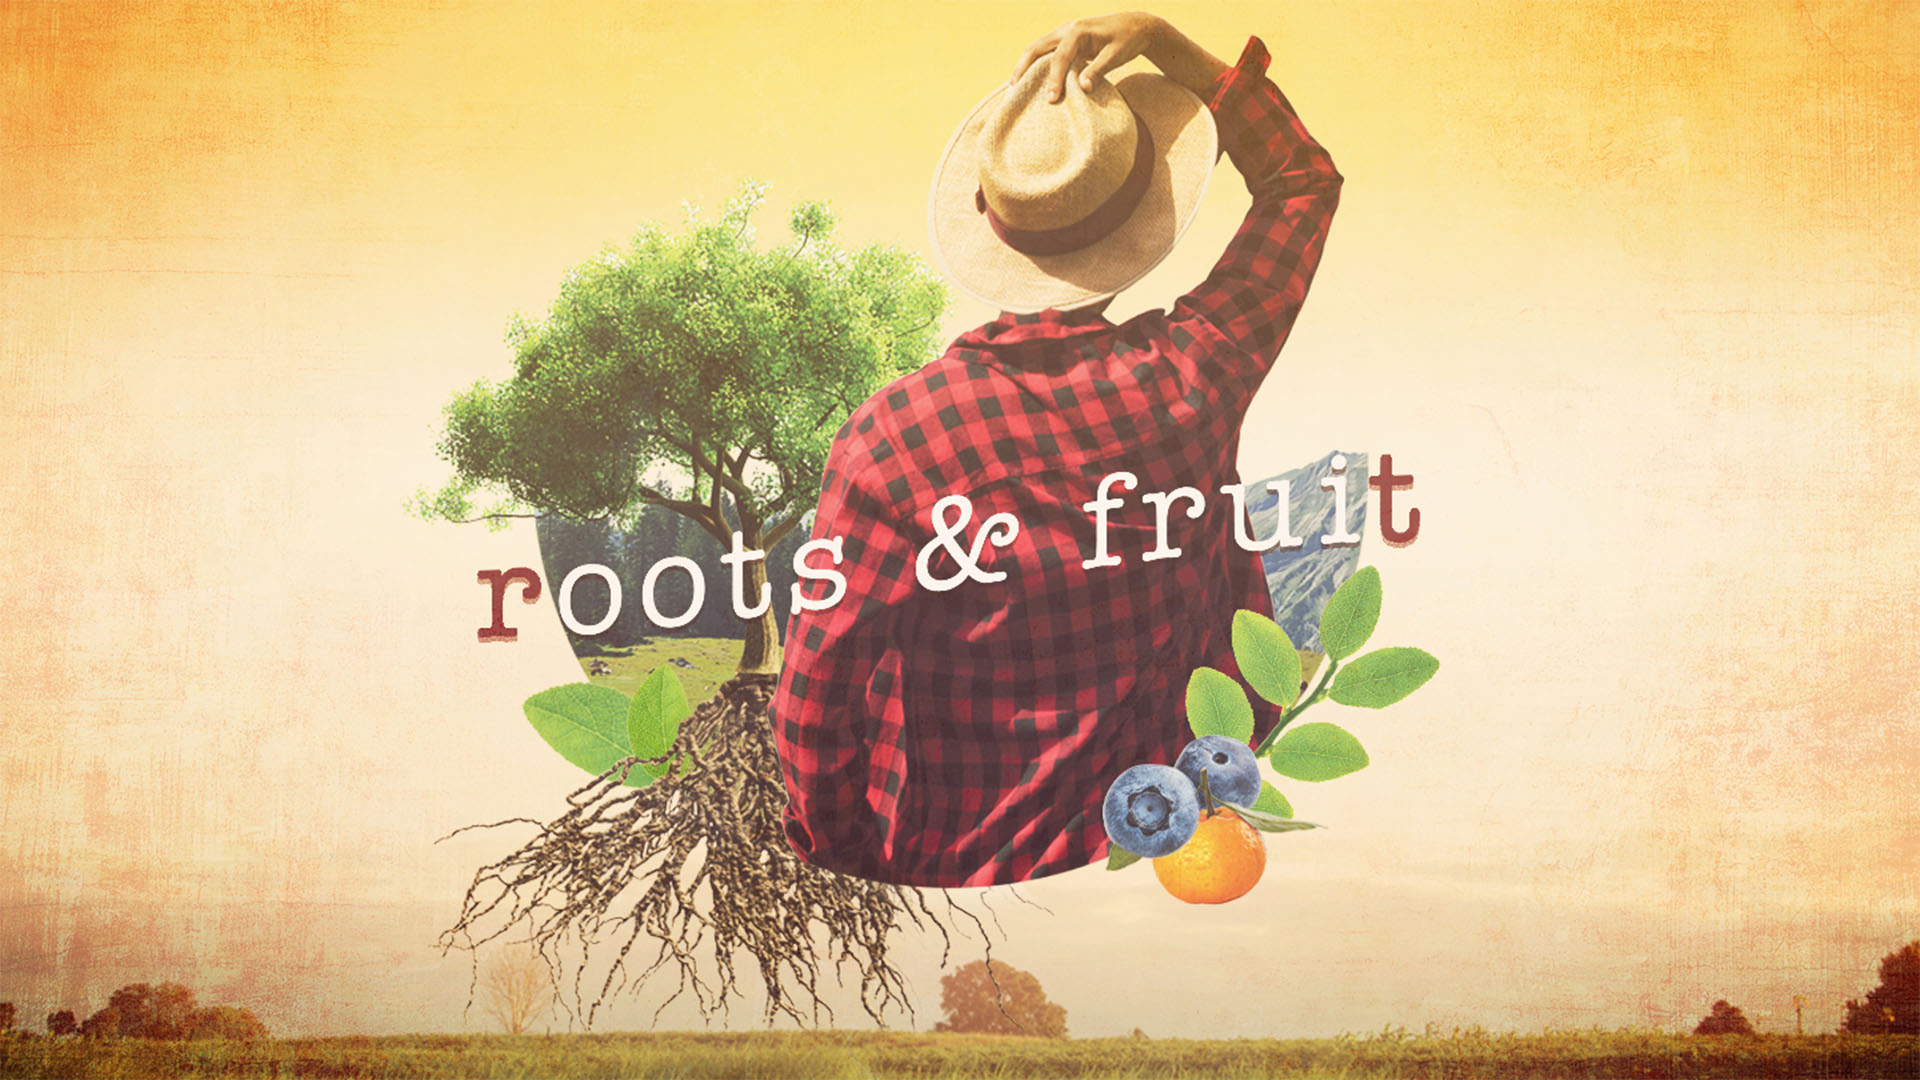 Roots And Fruit